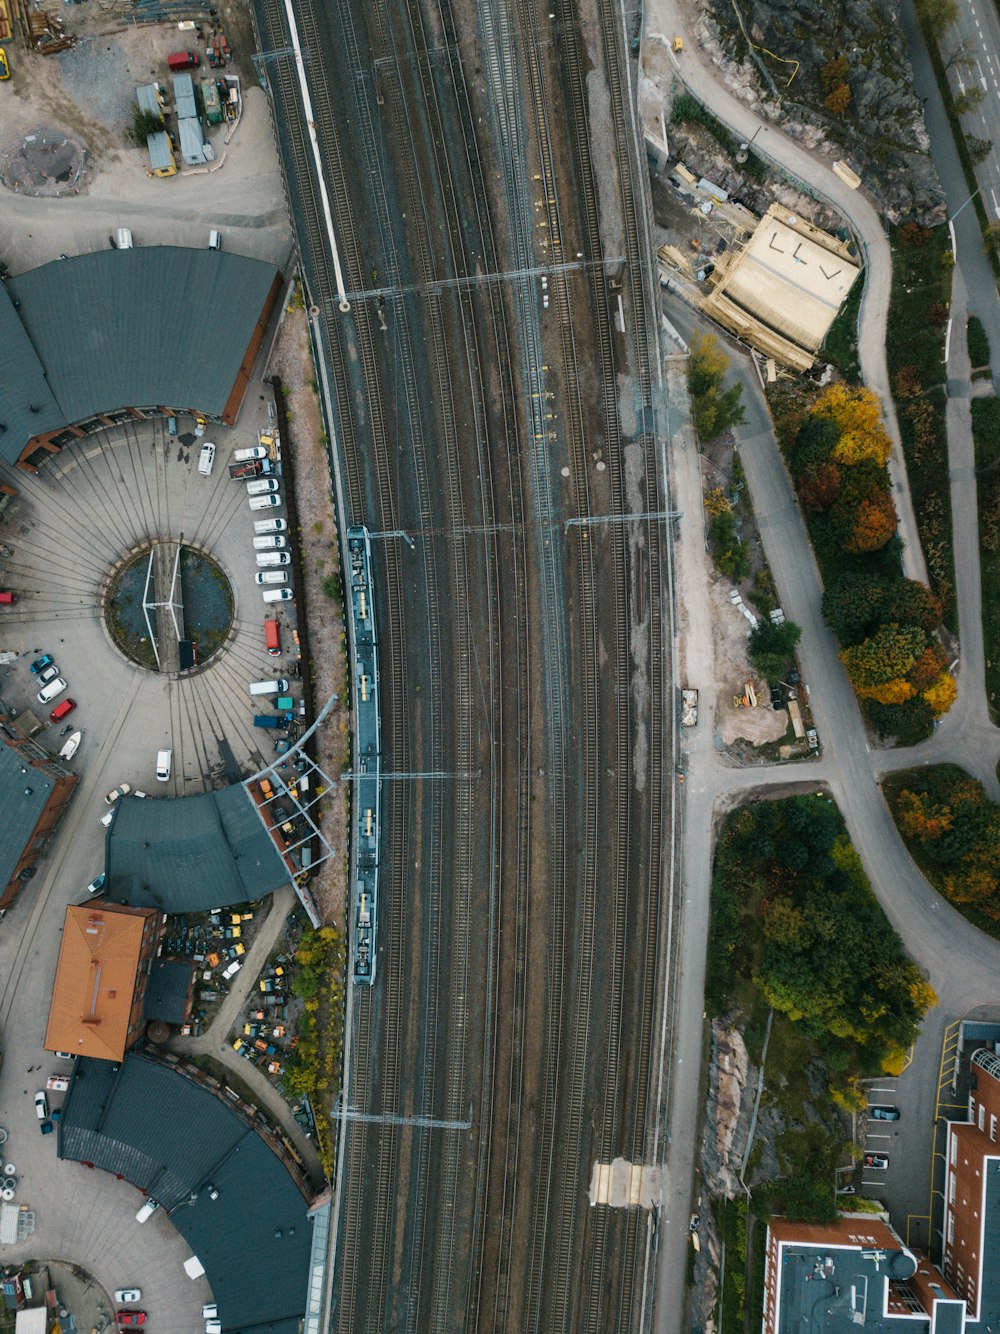 an aerial view of a city with a train track